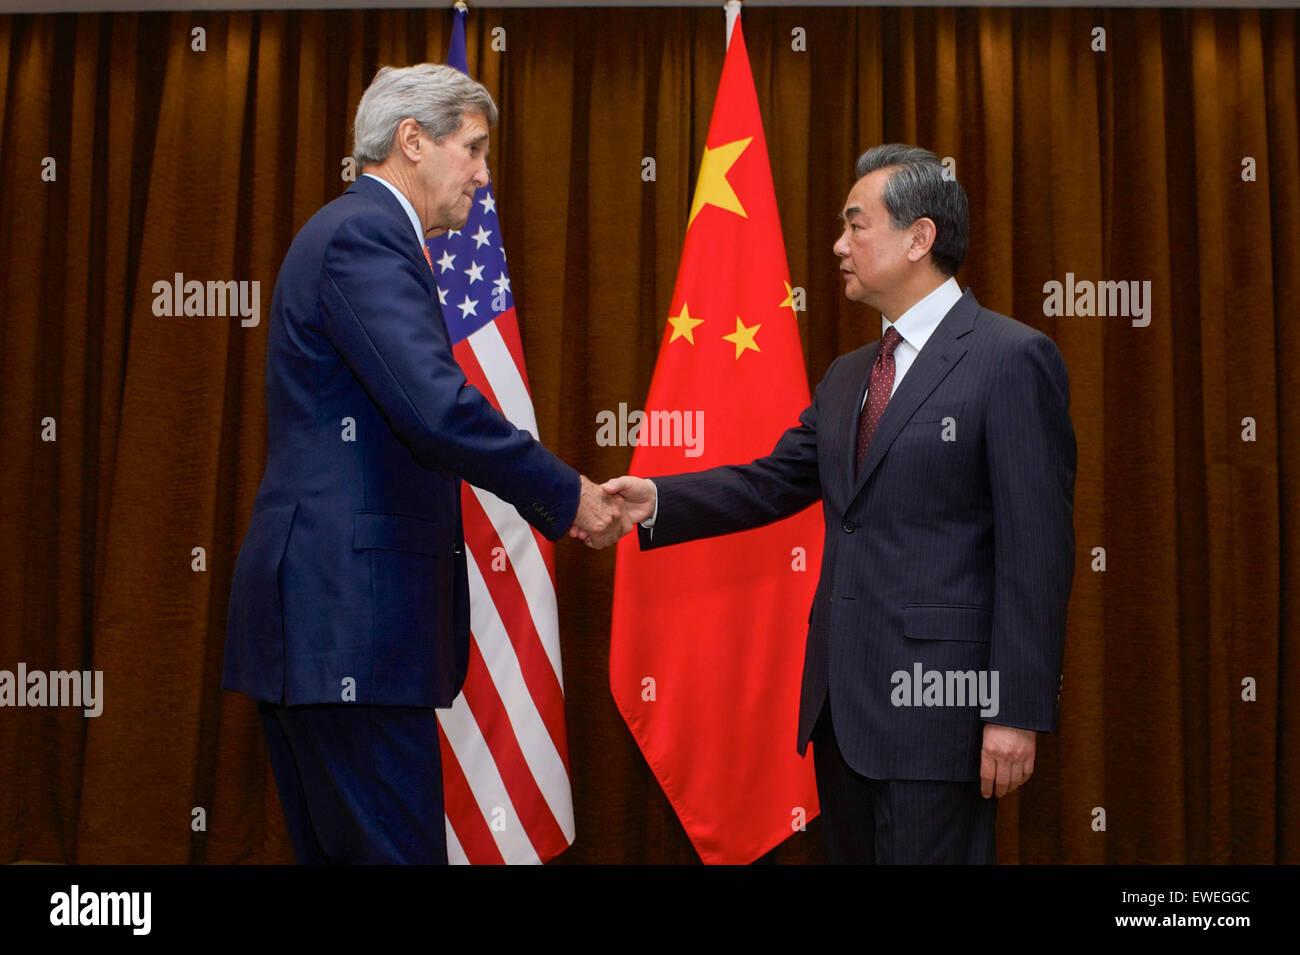 U.S. Secretary of State John Kerry shakes hands with Chinese Foreign Minister Wang Yi at the Ministry of Foreign Affairs in Beijing, China, before a bilateral meeting on May 16, 2015. Stock Photo